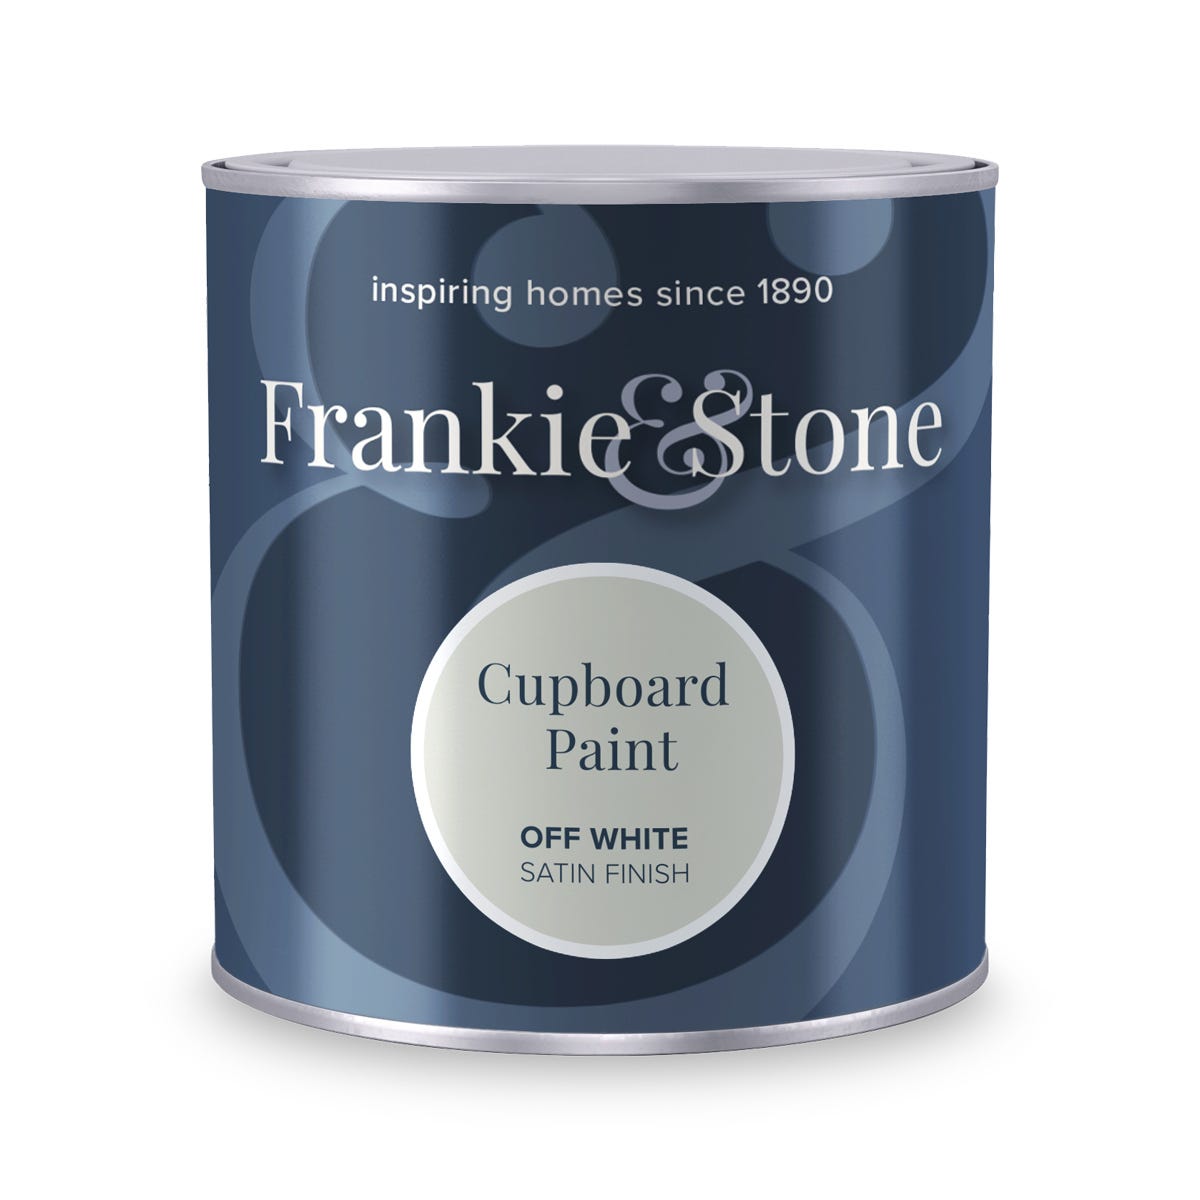 Frankie & Stone Cupboard Paint - Off White - 1L